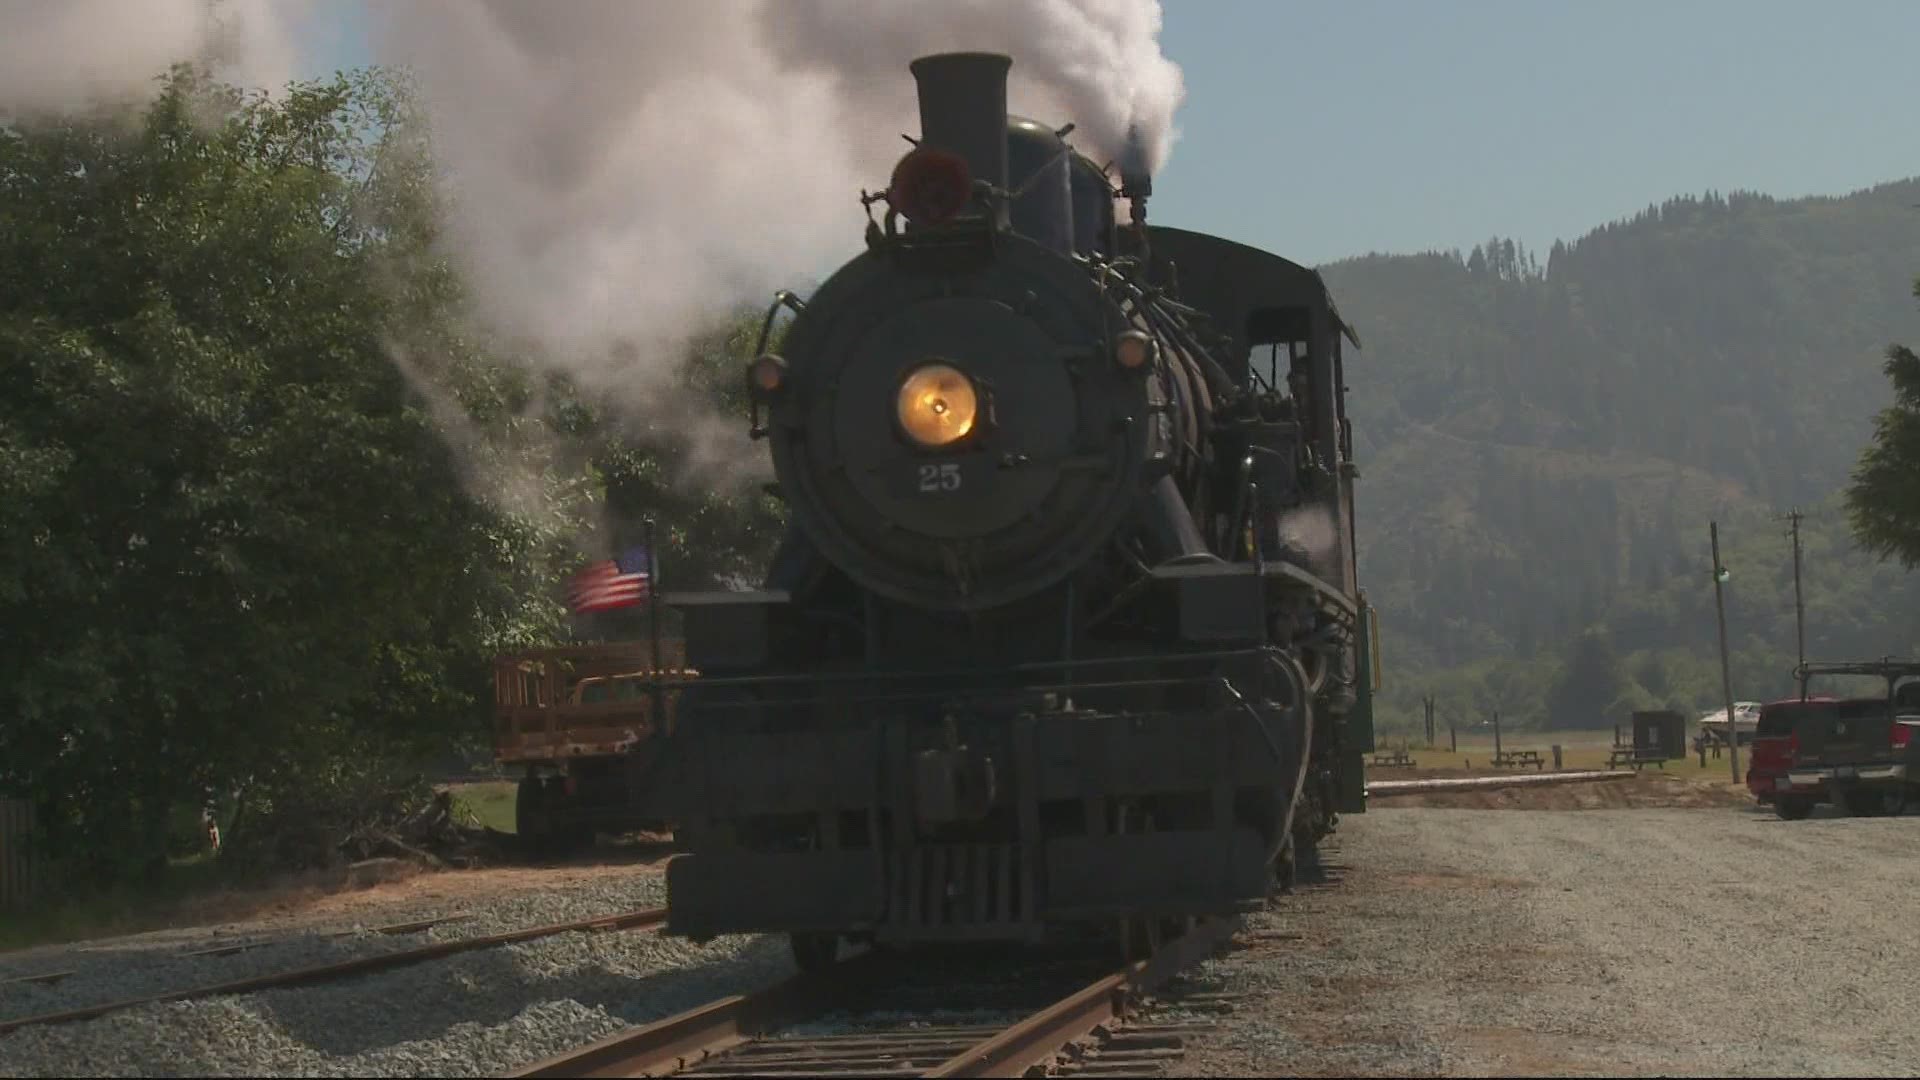 This week, Grant McOmie takes us on a scenic railroad trip through Tillamook County.